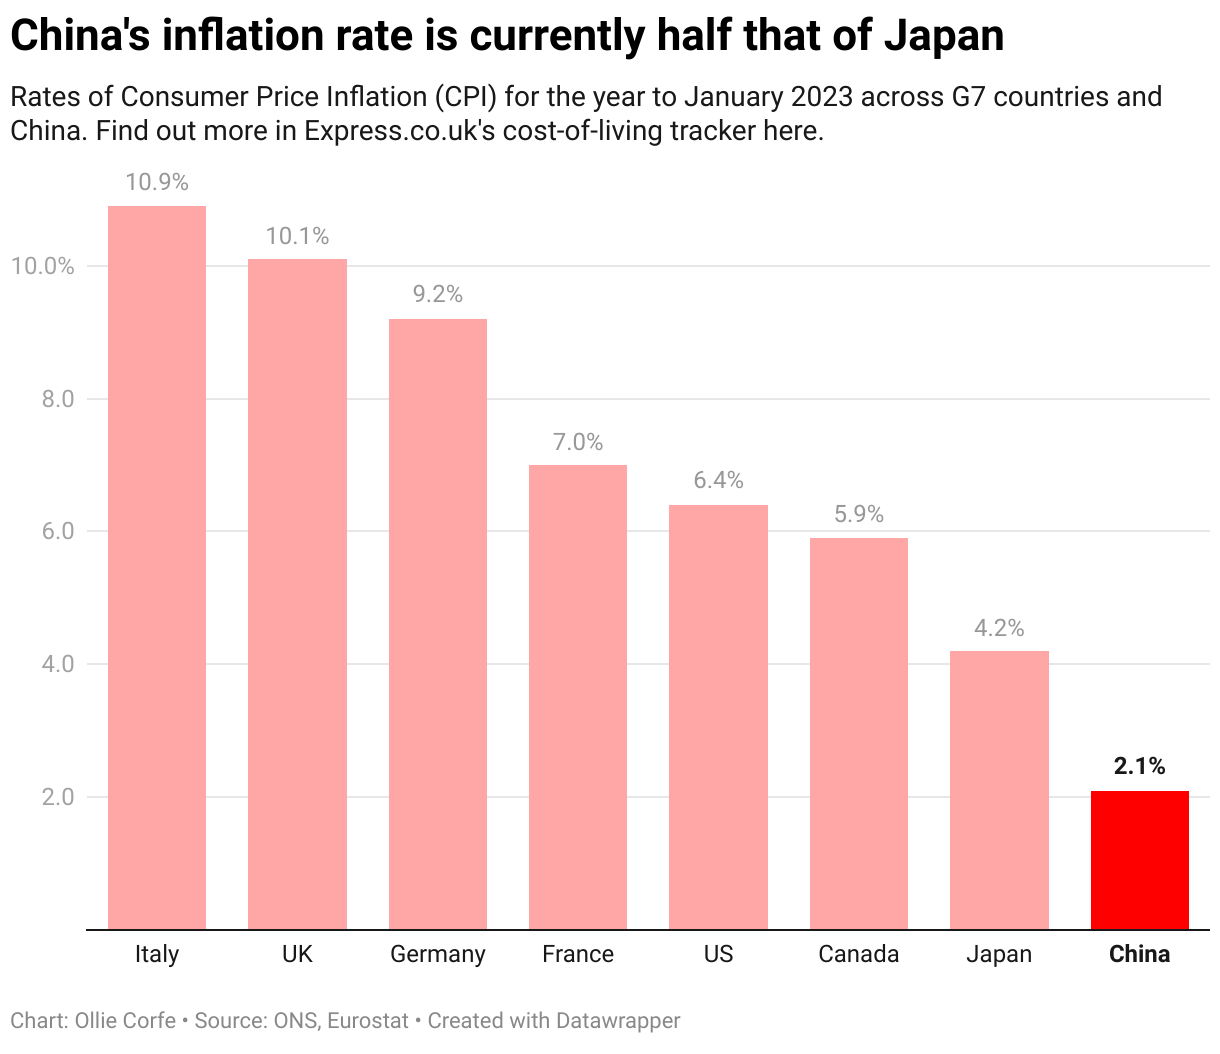 Column chart showing rates of CPI inflation across G7 countries.